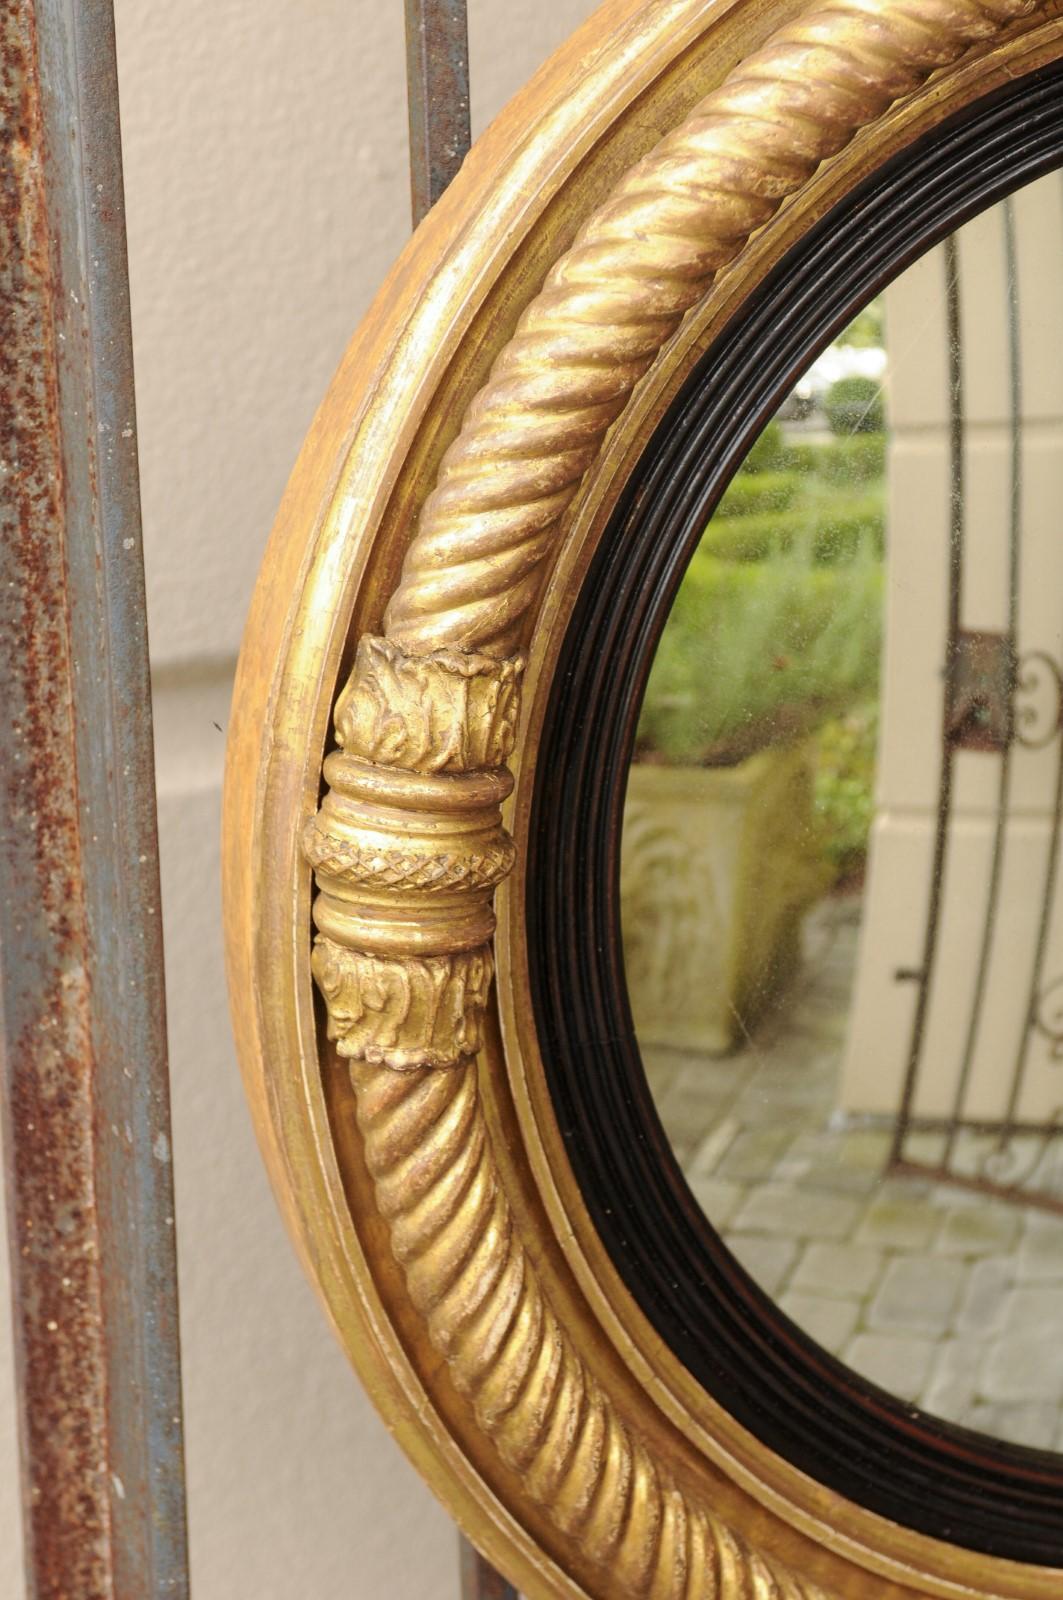 19th Century English Georgian Period 1820s Giltwood Convex Mirror with Twisted Rope Motifs